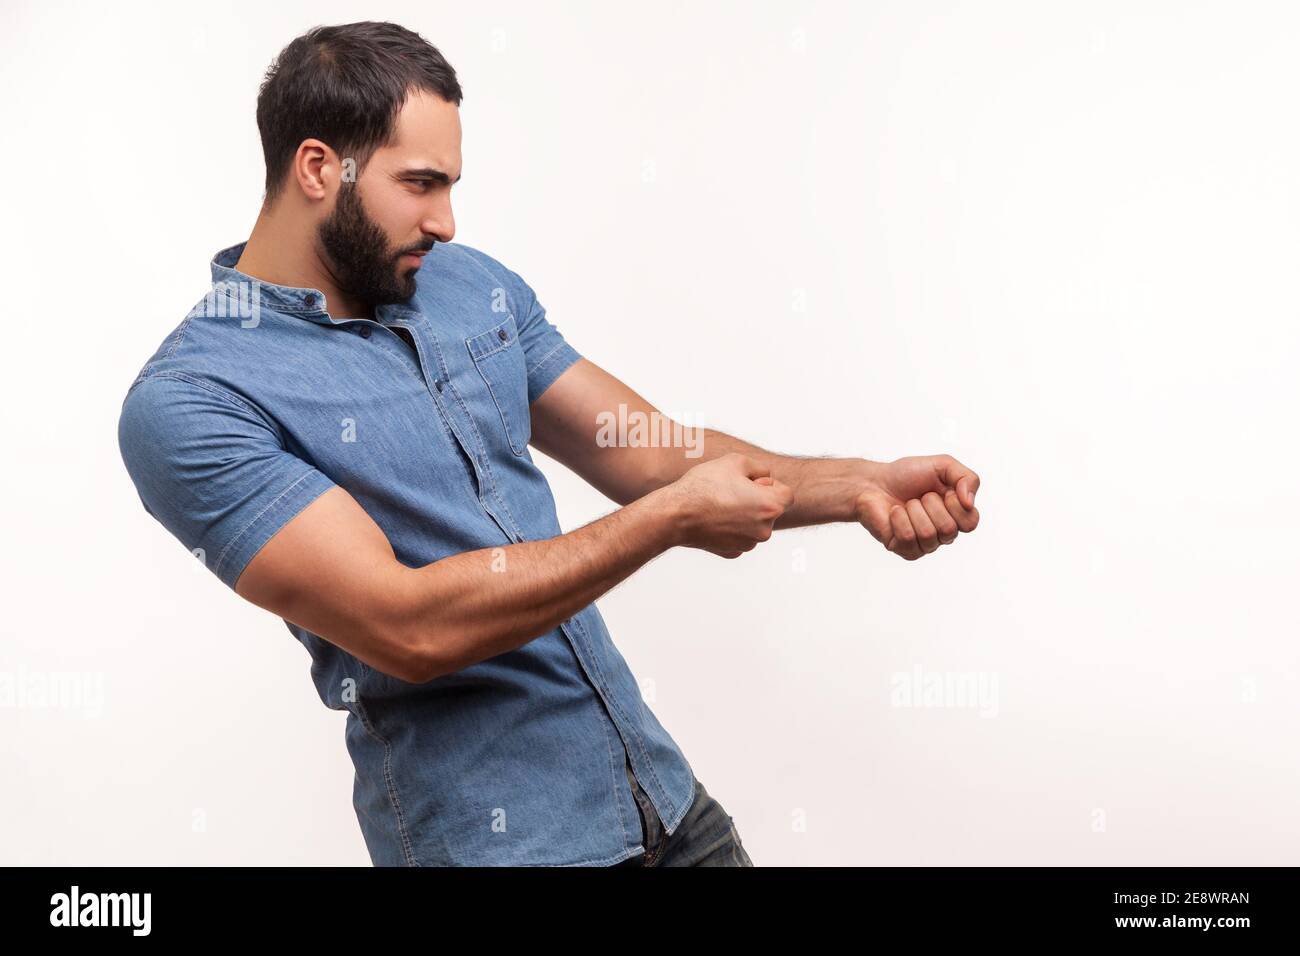 Profile portrait strong assertive man purposeful businessman with beard pulling invisible rope, showing his persistence and leadership qualities. Indo Stock Photo